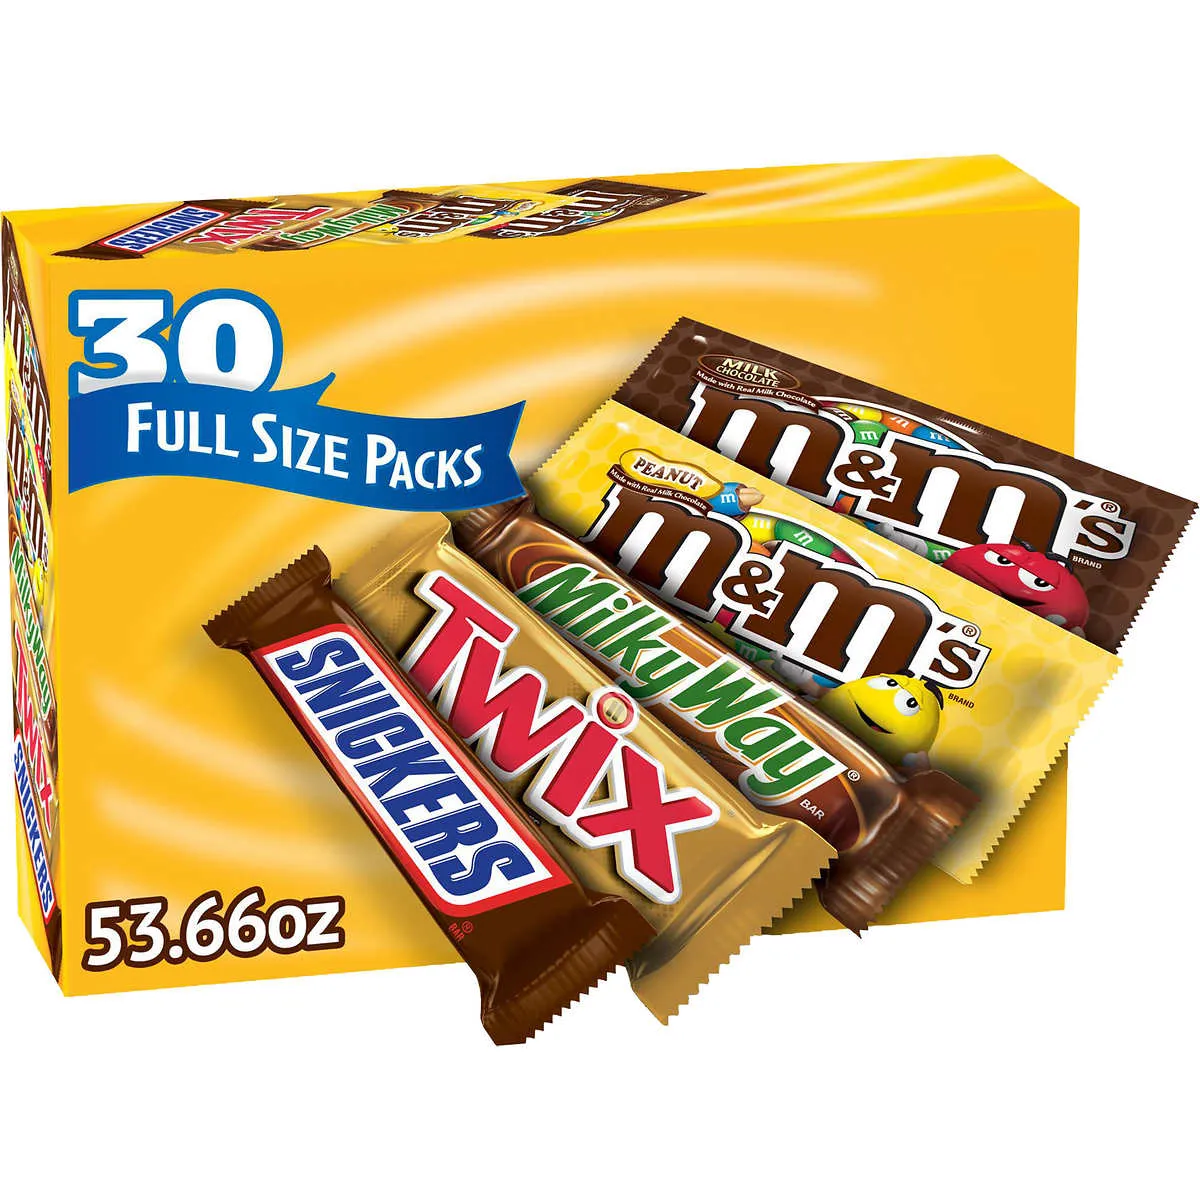 M&M'S, Snickers and More Chocolate Candy Bars, Variety Pack, 30 ct